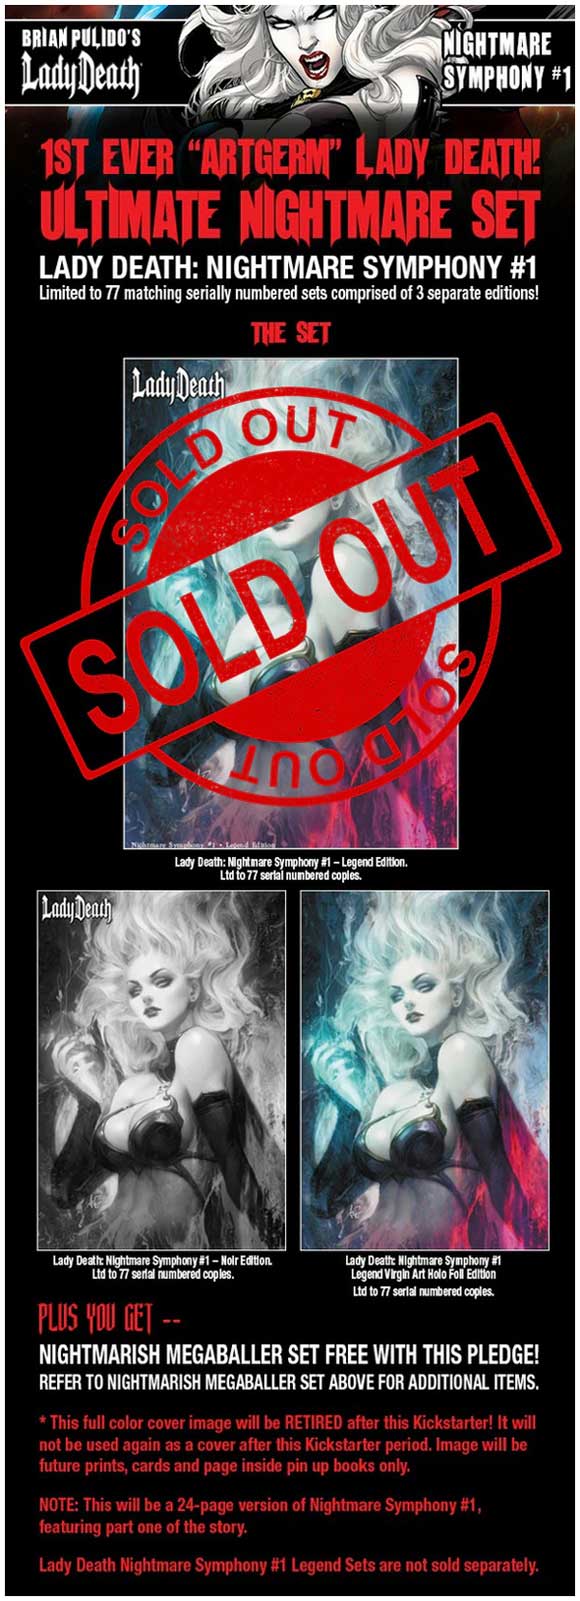 Lady Death Nightmare Symphony #1 Artgerm Set Sold out